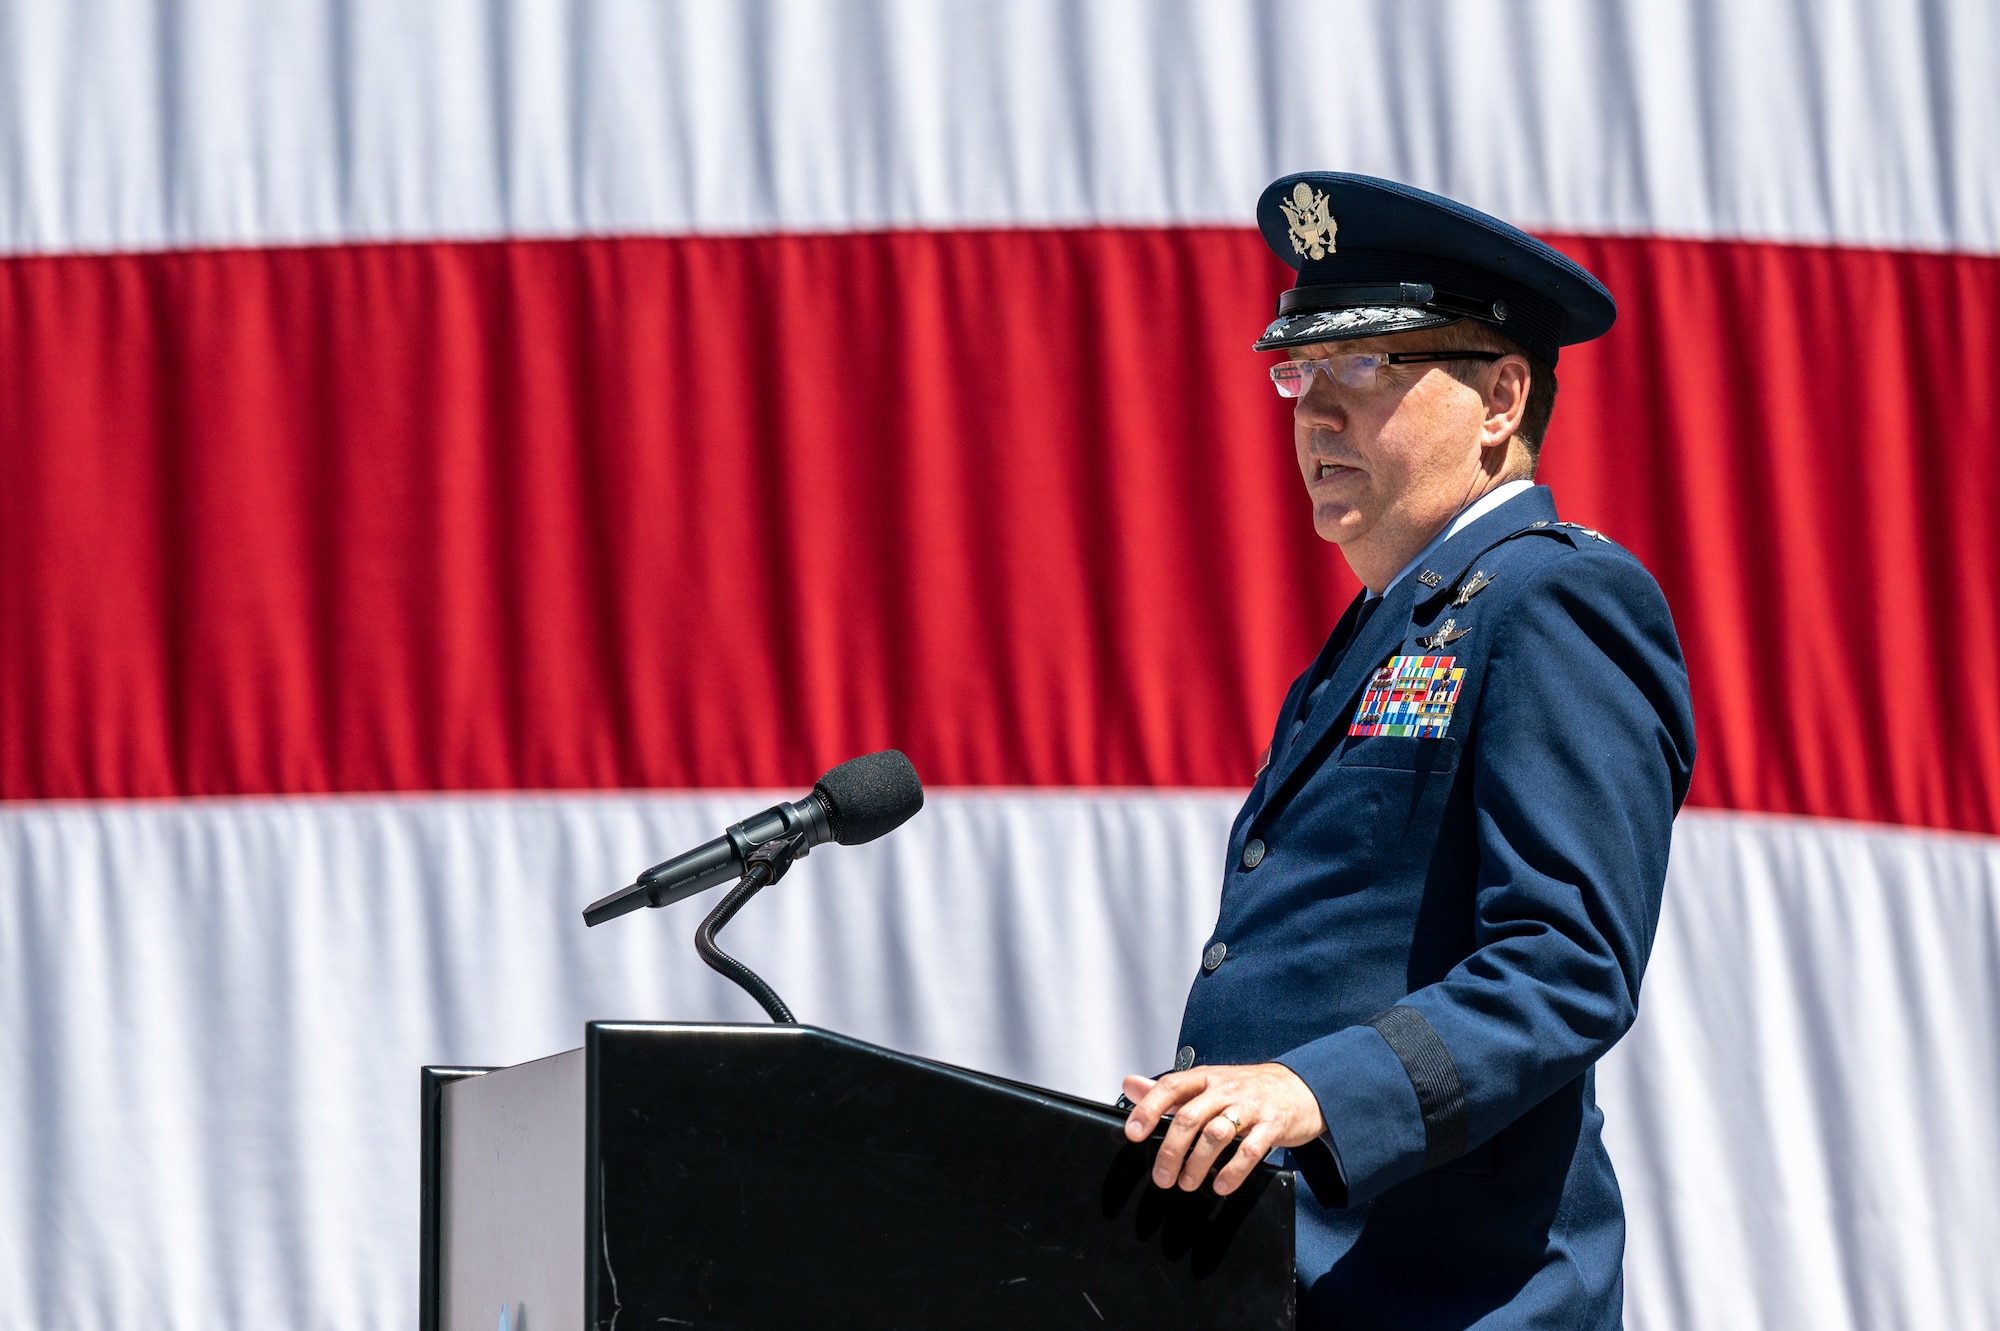 U.S. Air Force Maj. Gen. Shawn Bratton, Space Training and Readiness Command commander, delivers opening remarks during Delta 11’s change of command ceremony at Schriever Space Force Base, Colorado, July 7, 2023. Delta 11 is responsible for delivering realistic, threat-informed test and training resources to U.S. Space Force, joint, and coalition space operators via live, virtual, and constructive threat replication, leveraging the National Space Test and Training Complex across multiple space warfighting disciplines. (U.S. Space Force photo by Ethan Johnson)